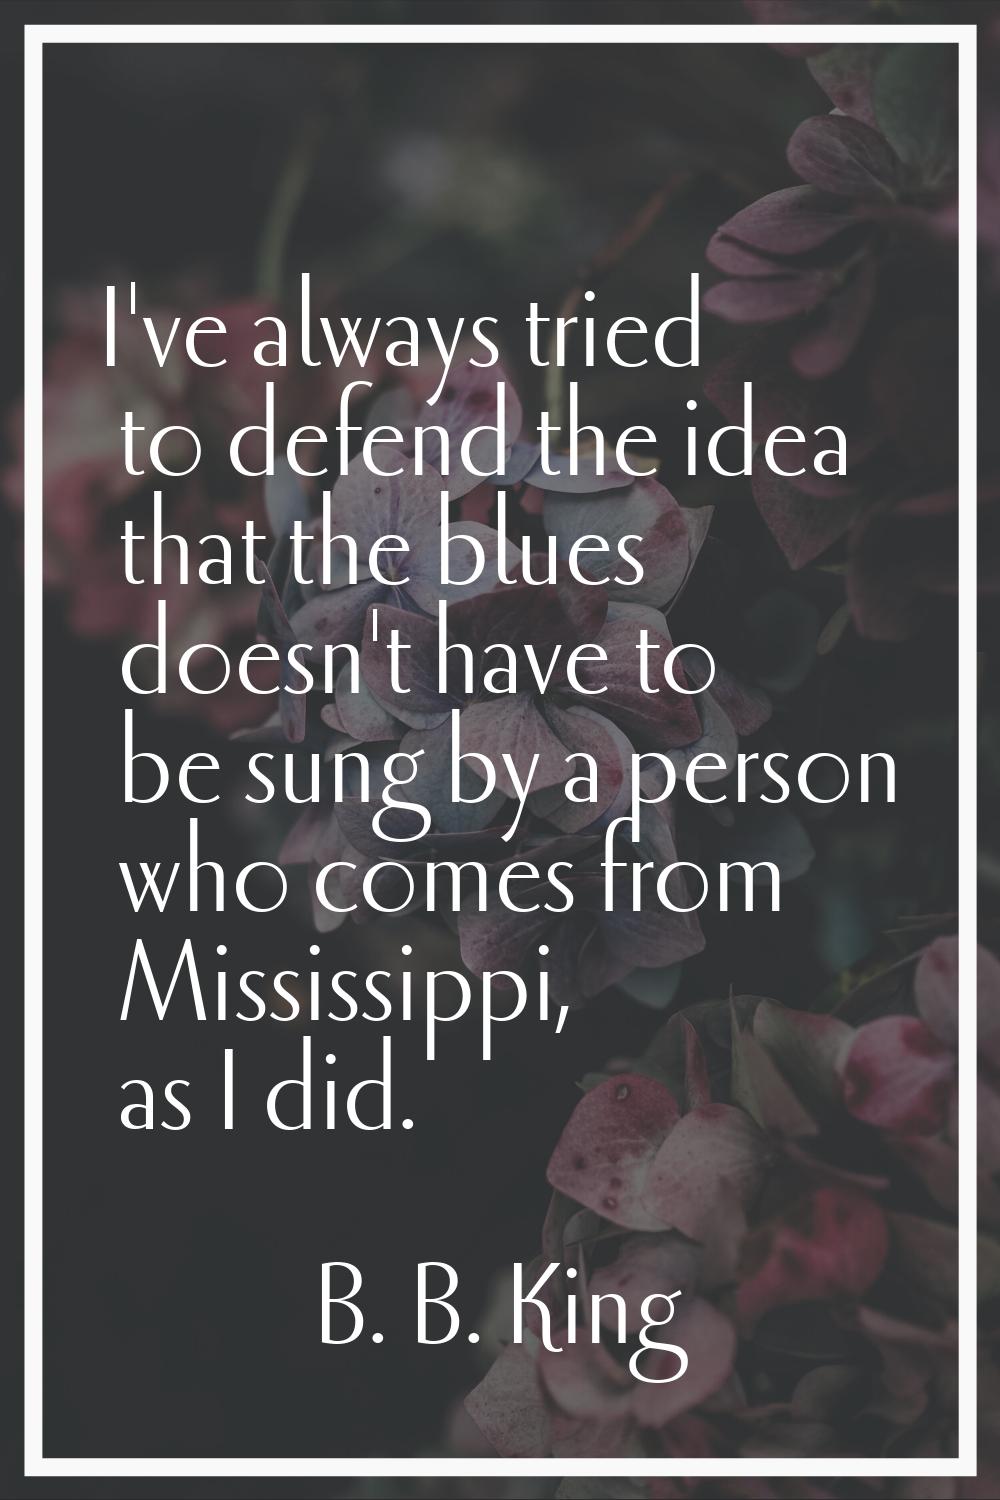 I've always tried to defend the idea that the blues doesn't have to be sung by a person who comes f